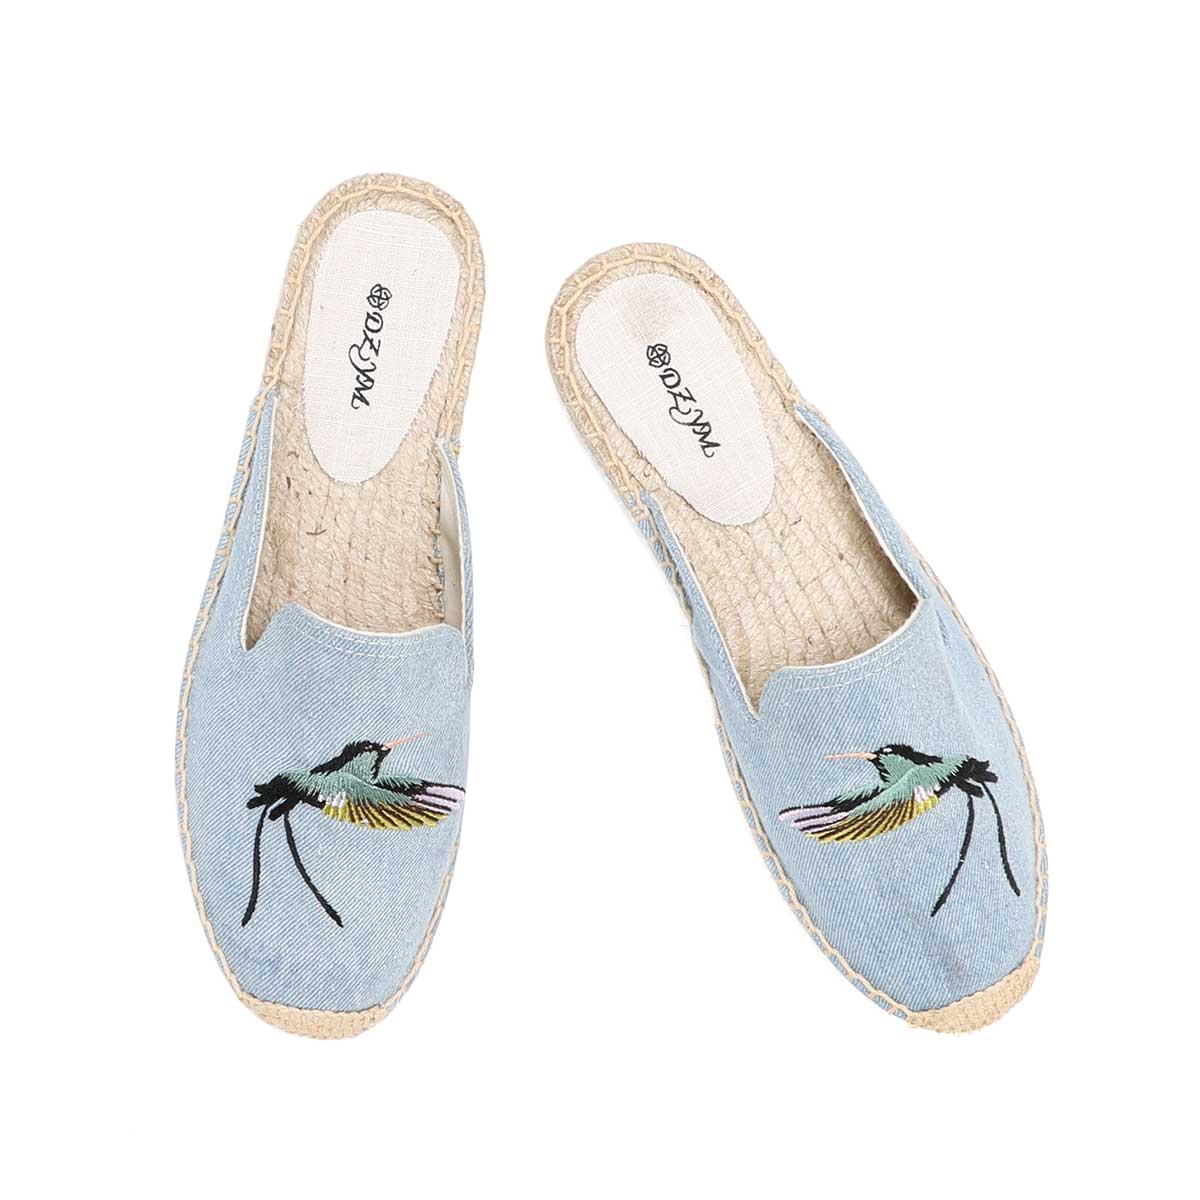 Ladies Summer Fashion Toe Slippers Sandals Flat Comfortable Breathable Slip-On Espadrilles Denim Floral Embroidered Mules